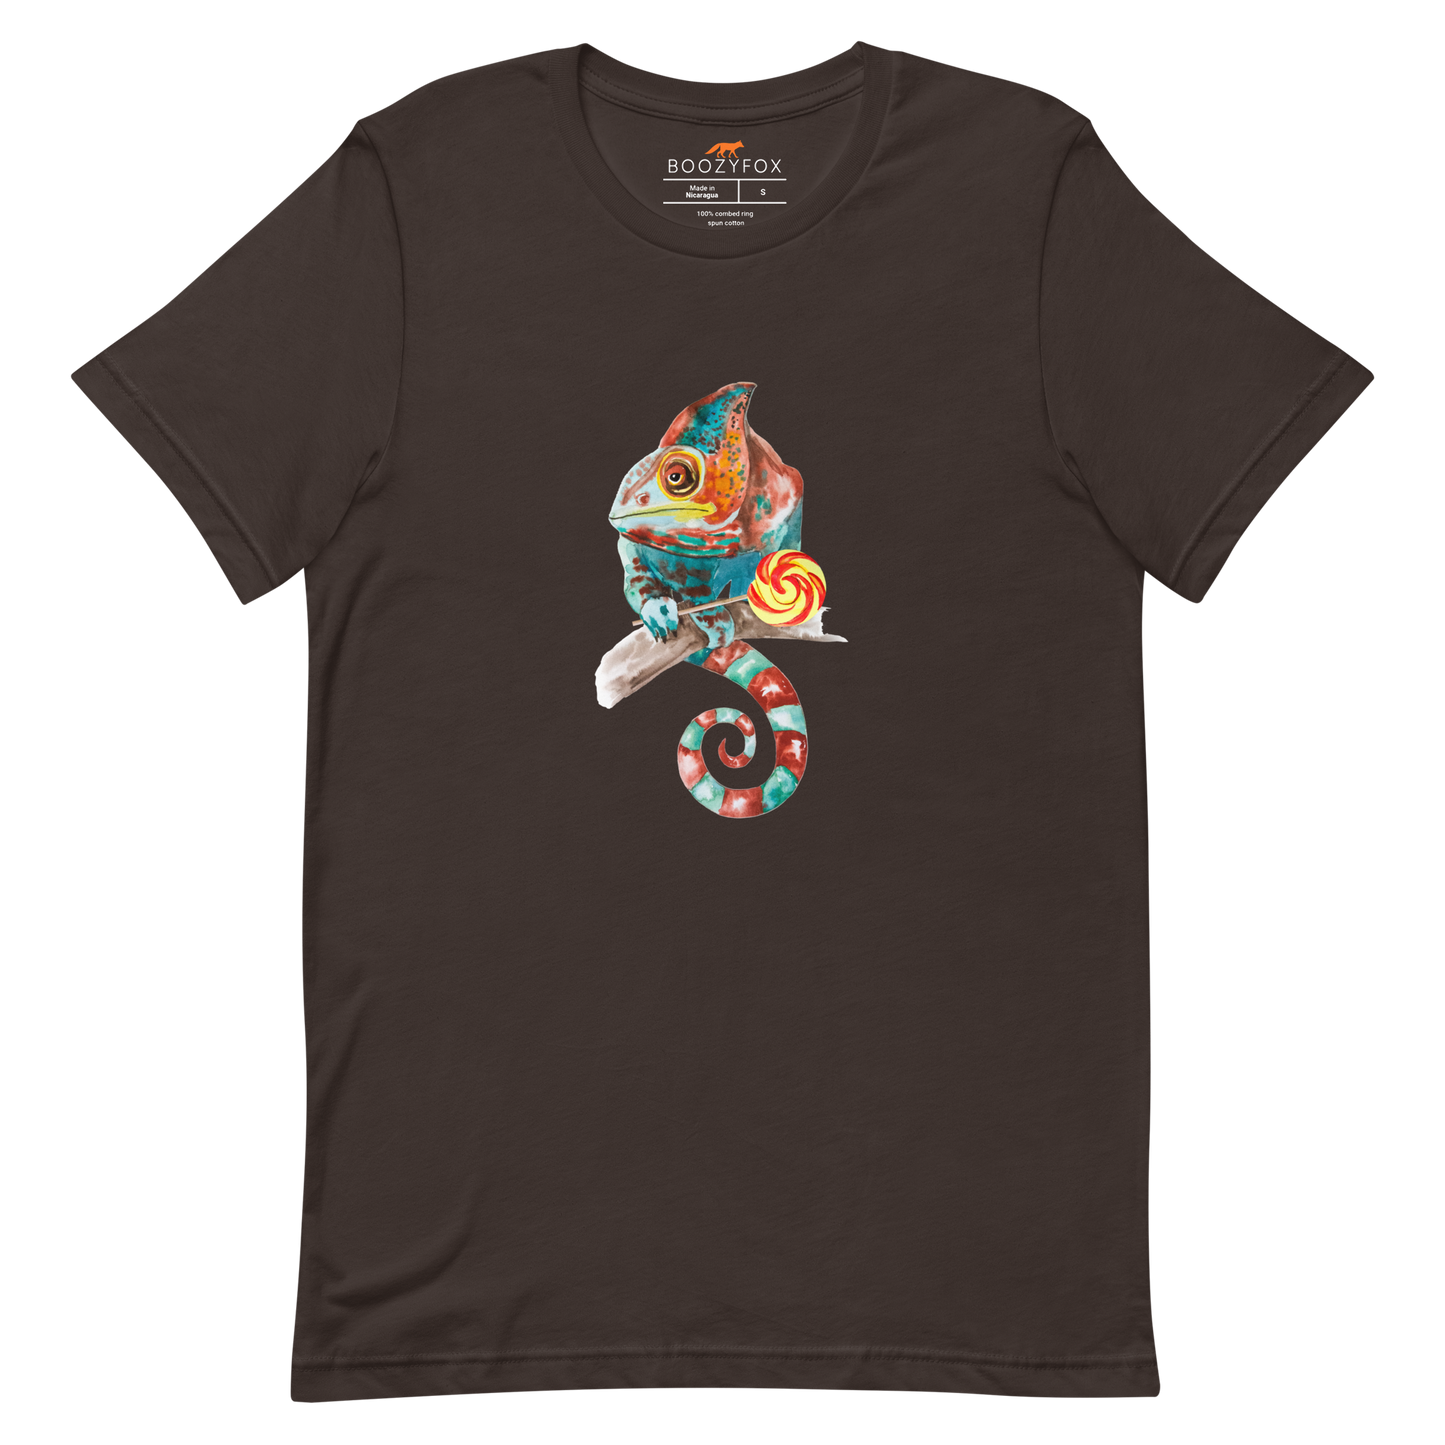 Brown Premium Chameleon T-Shirt featuring a charming Chameleon With A Lollipop graphic on the chest - Cool Graphic Chameleon Tees - Boozy Fox